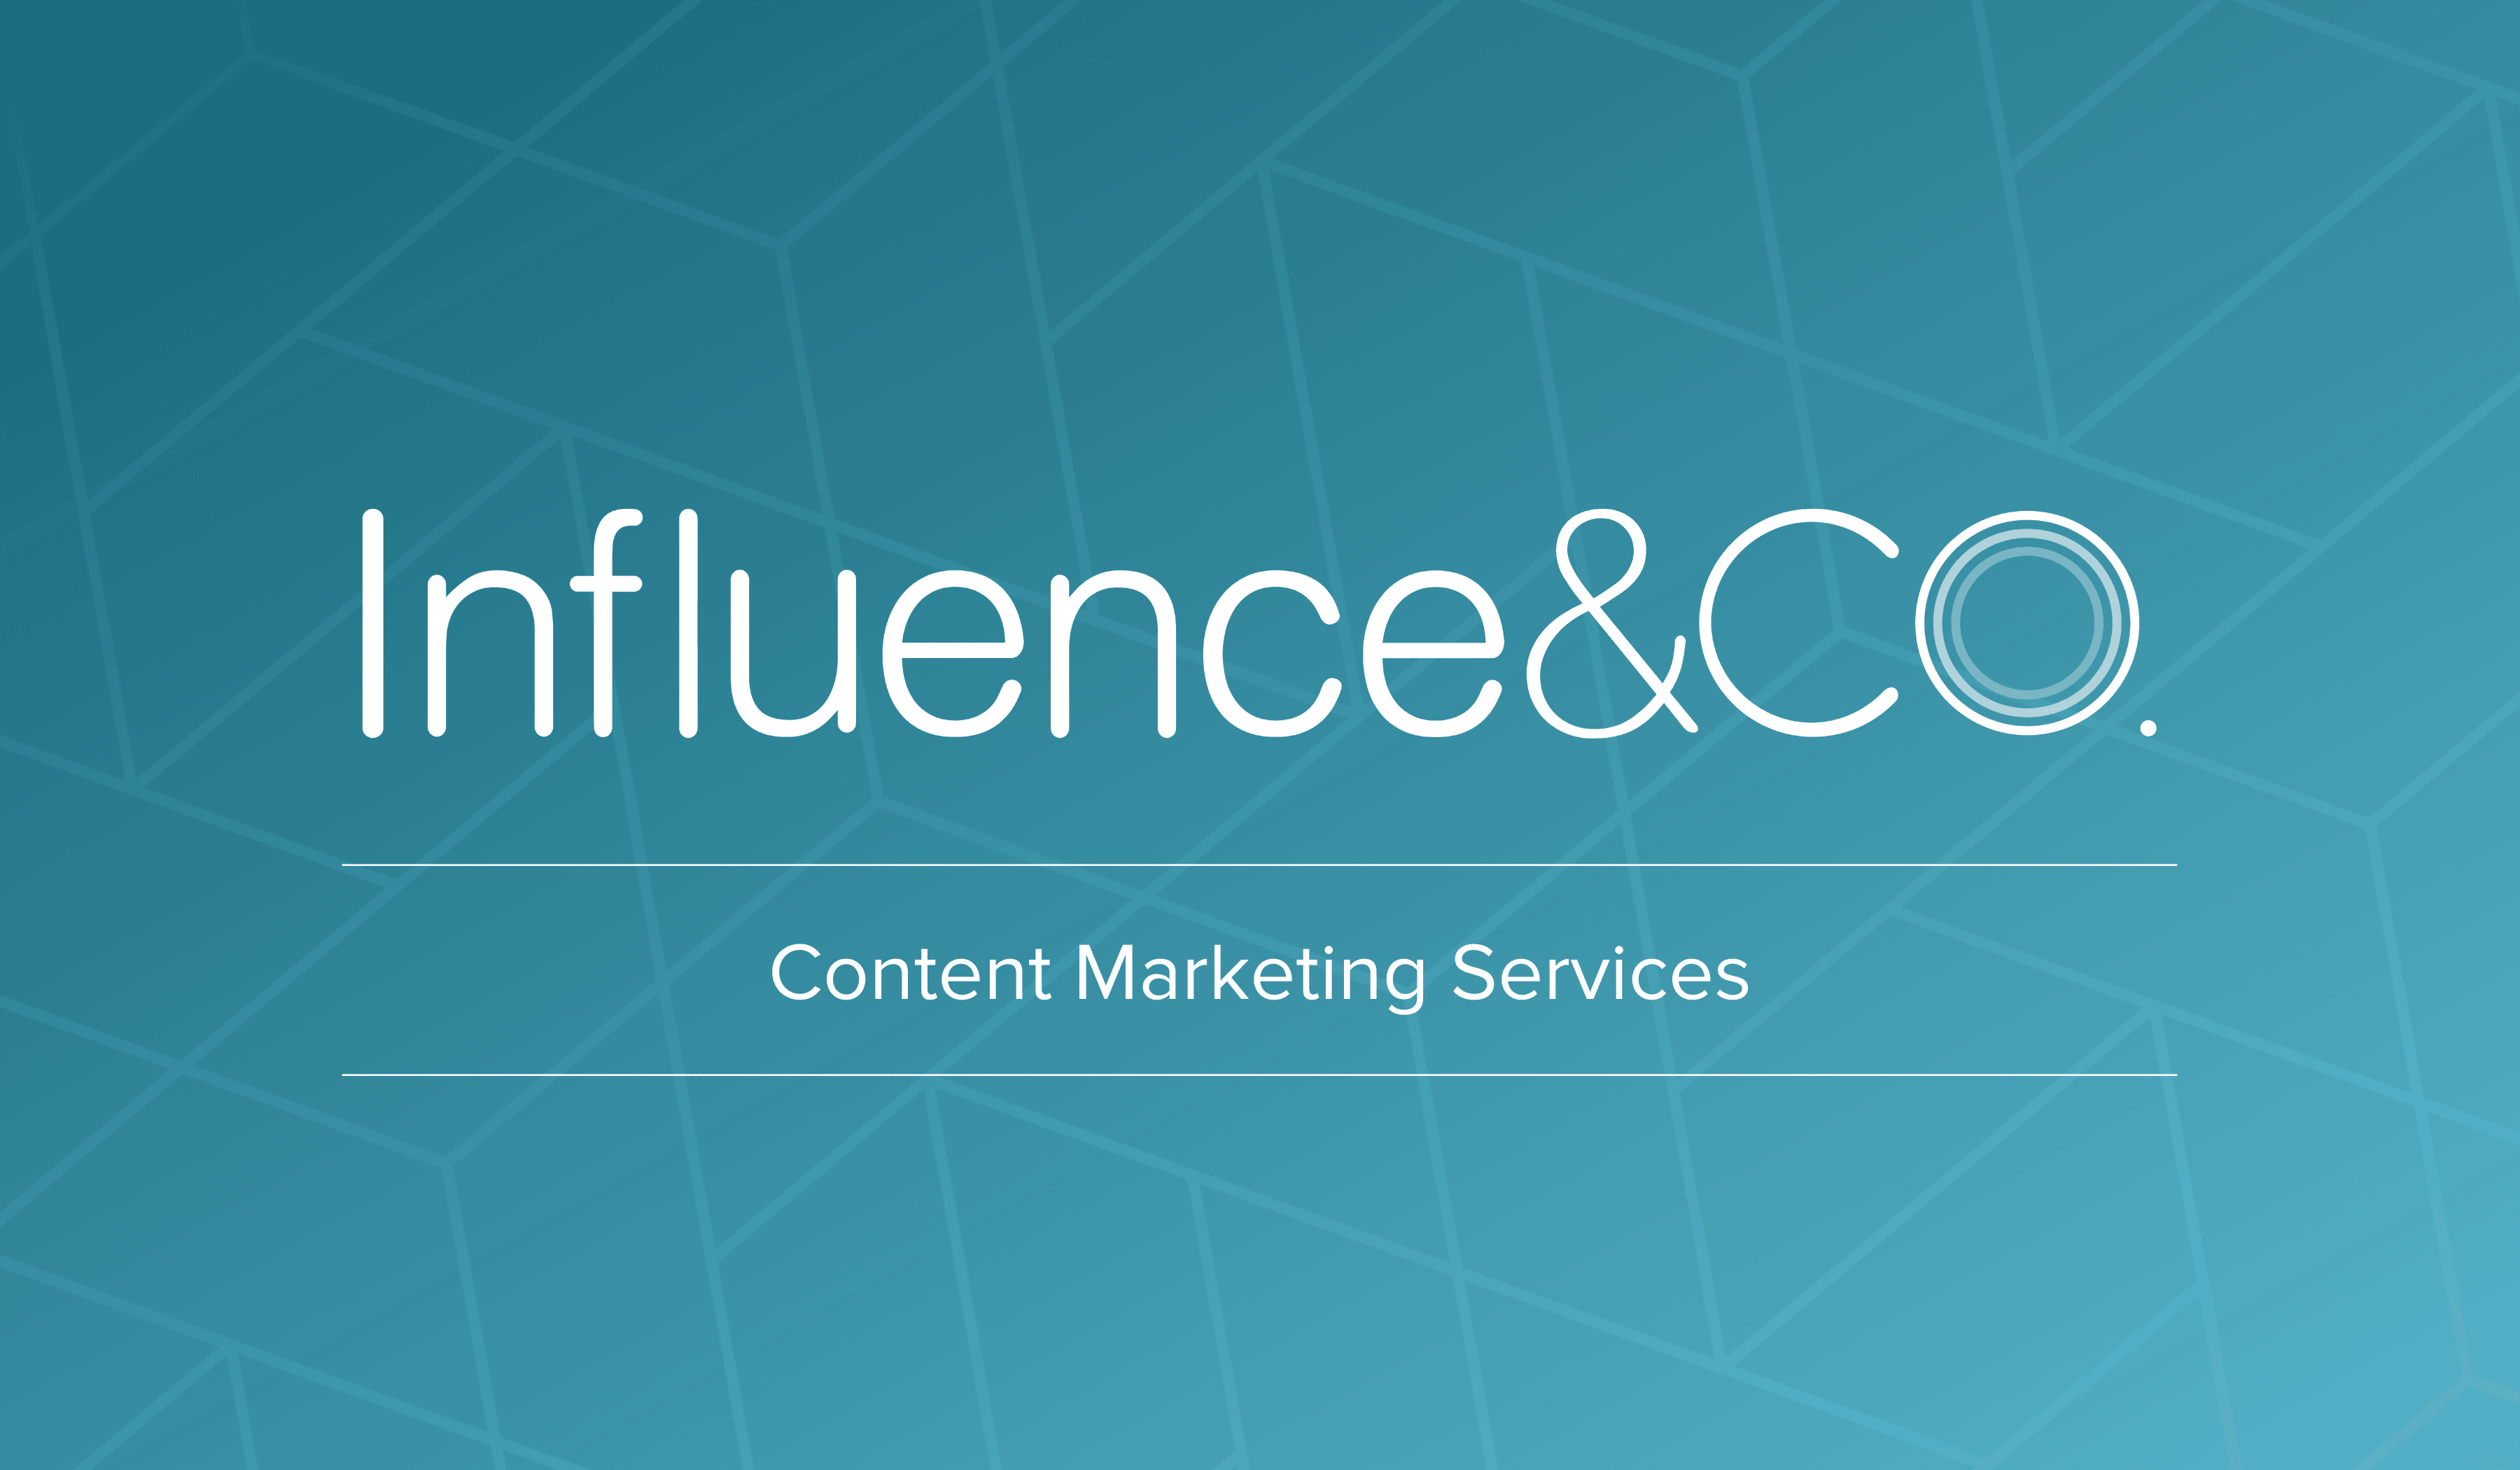 Product: Content and Digital Marketing Services | Influence & Co.